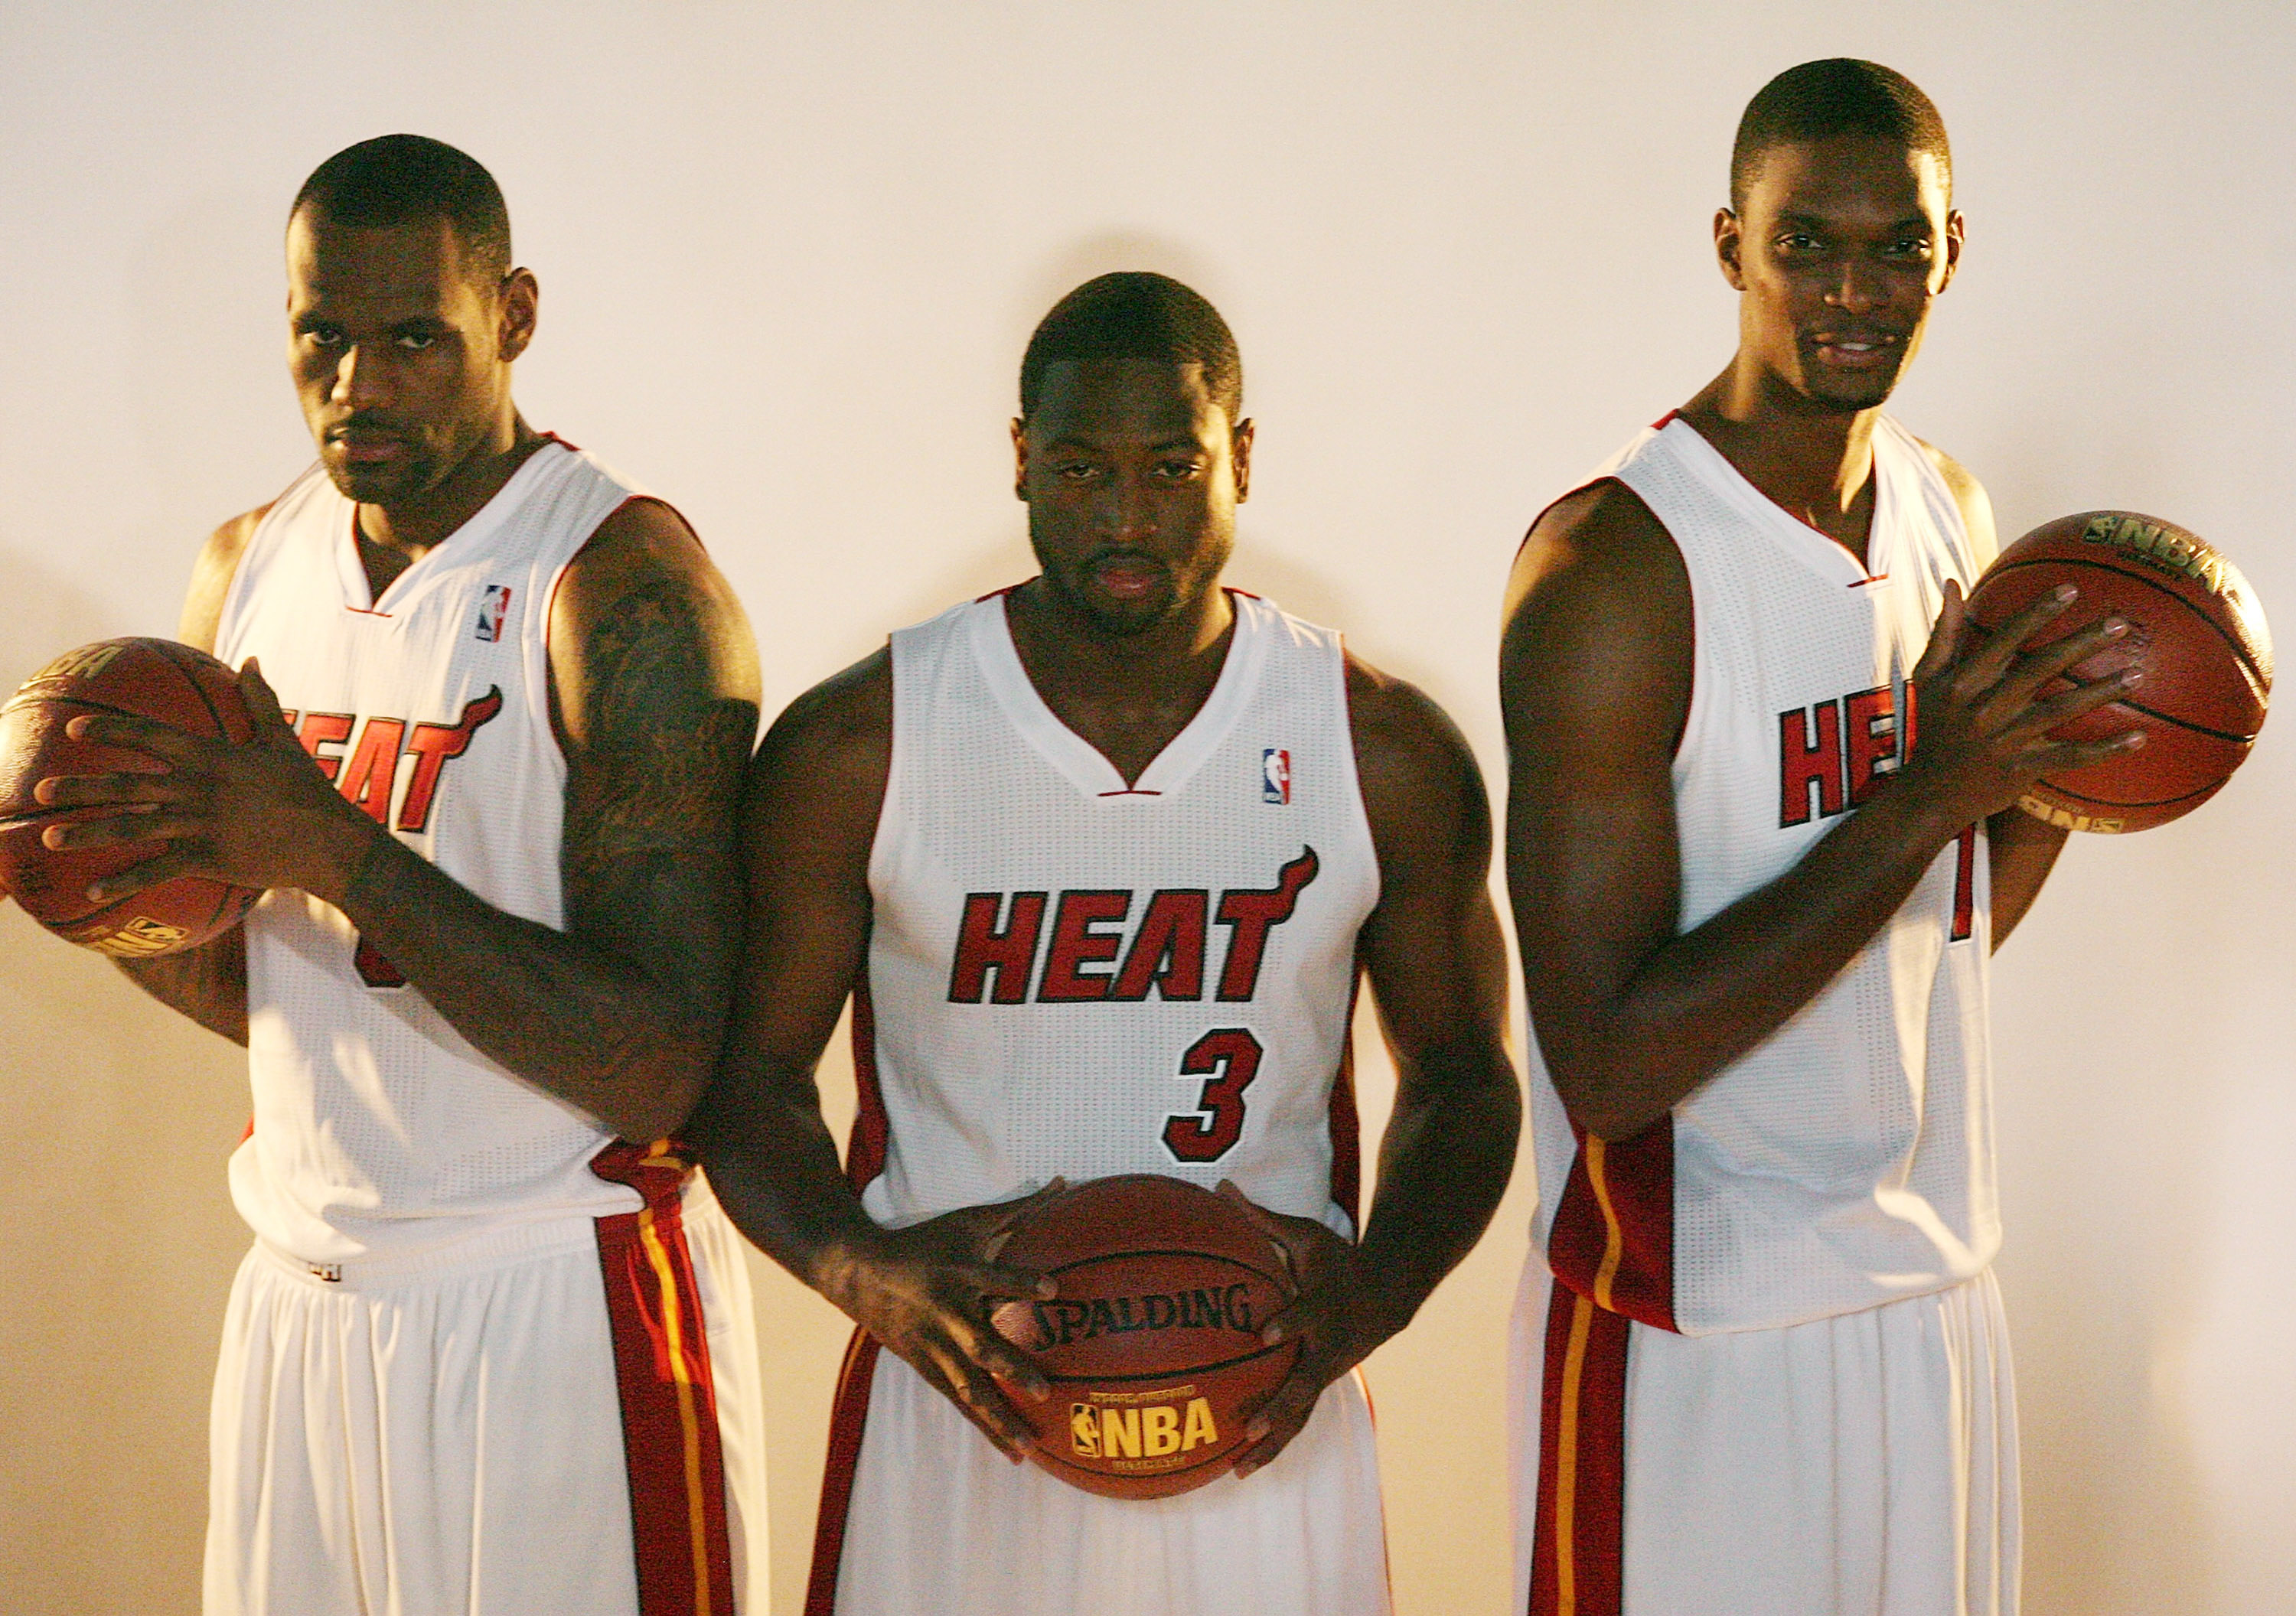 MIAMI - SEPTEMBER 27:  (L-R) LeBron James, Dwyane Wade and Chris Bosh of the Miami Heat pose for photos during media day at the Bank United Center on September 27, 2010 in Miami, Florida.  (Photo by Marc Serota/Getty Images)